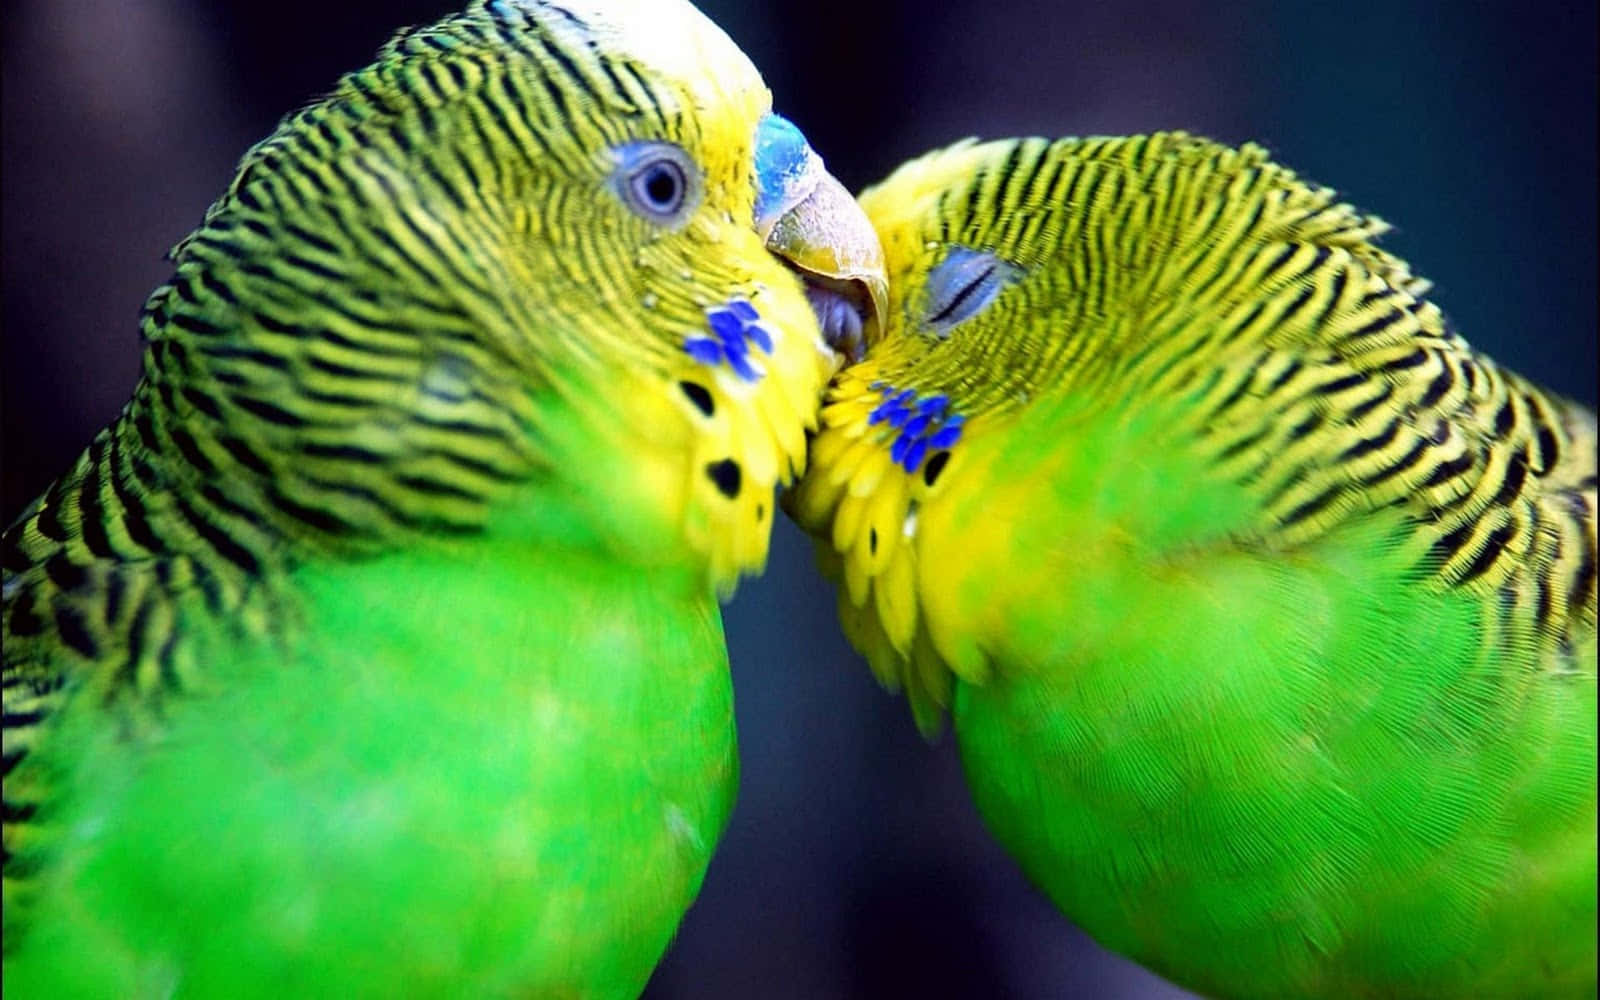 Two Love Birds Sharing their Love